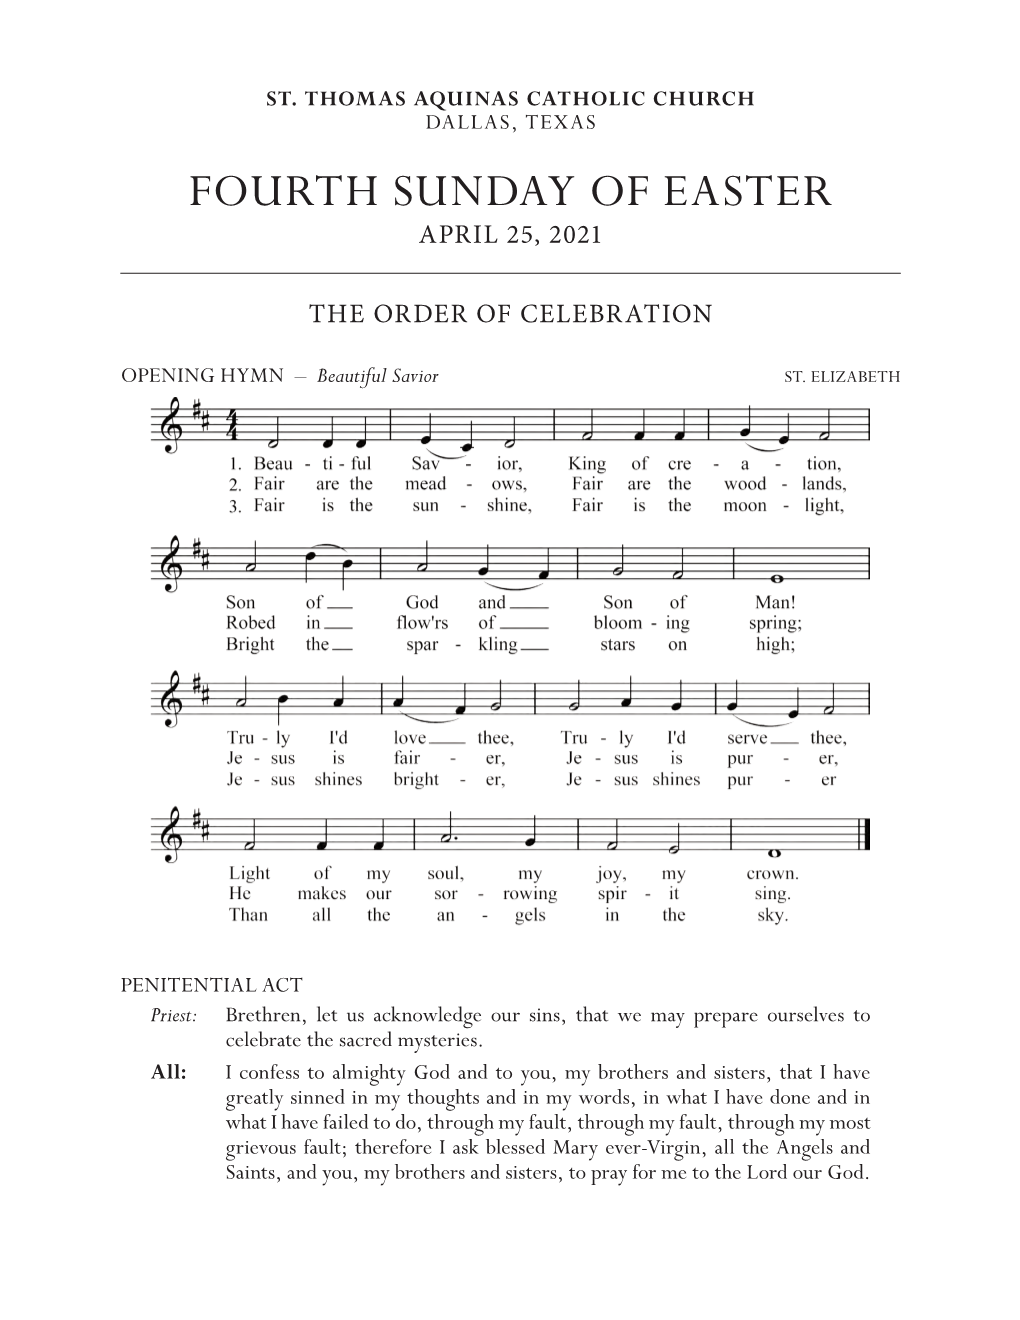 Fourth Sunday of Easter April 25, 2021